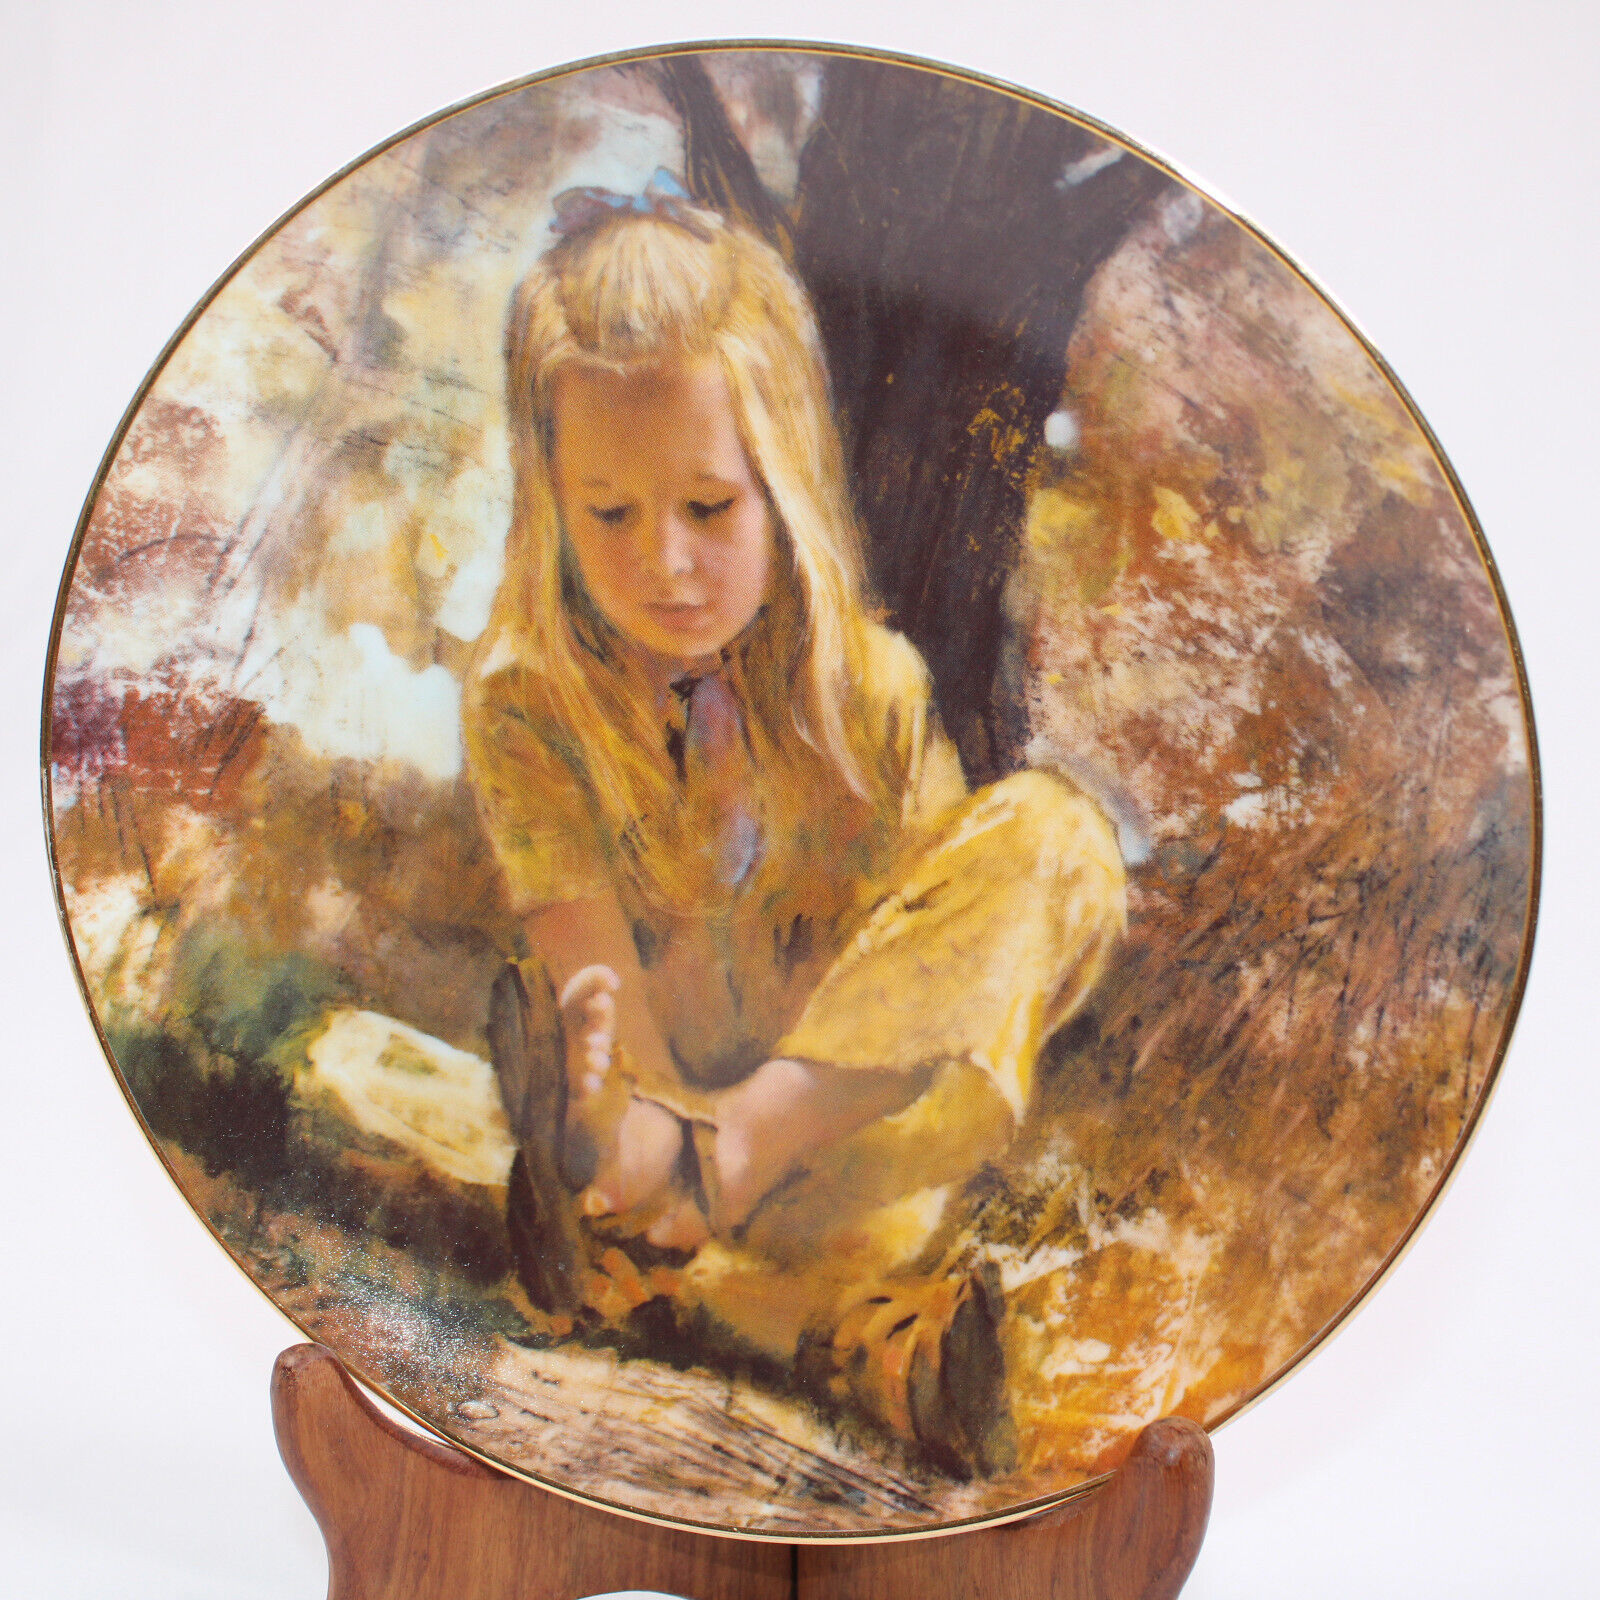 VTG Sand In Her Shoe 1979 Precious  Moments Collector Plate Artist Thornton Utz - $11.65